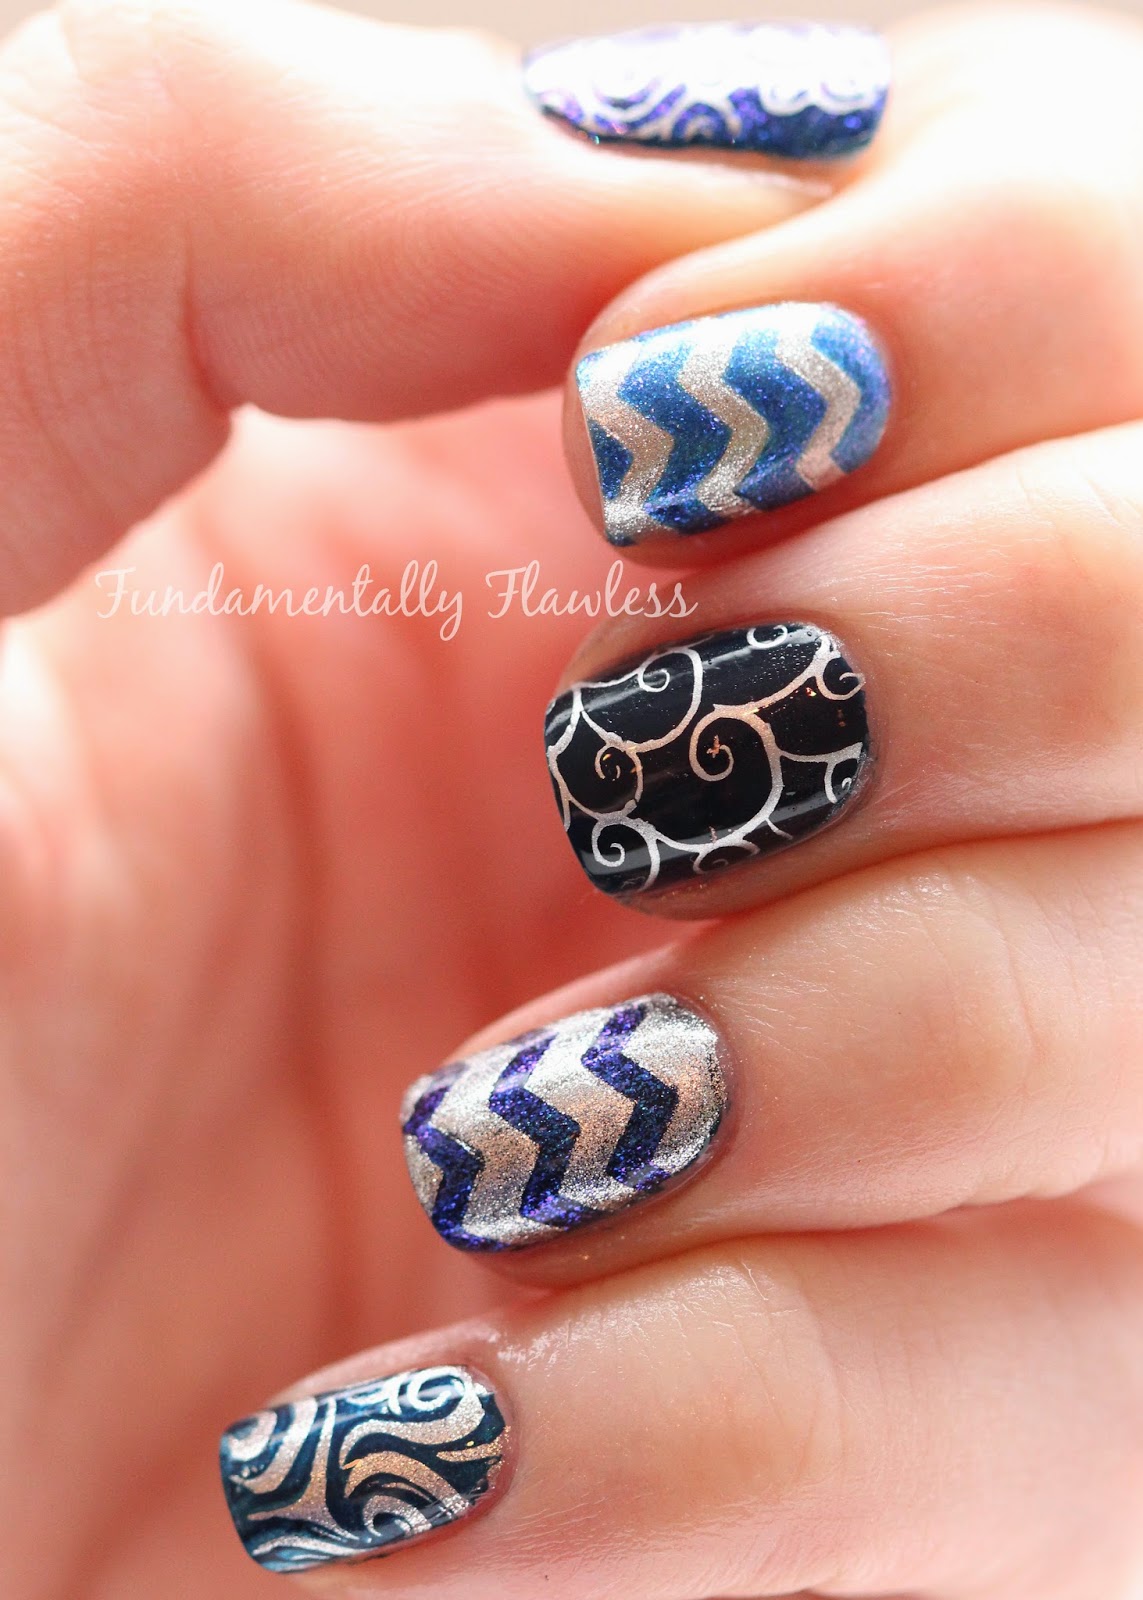 Navy Blue and Silver Nail Art with MoYou Sailor Collection 03 and Nail Vinyls